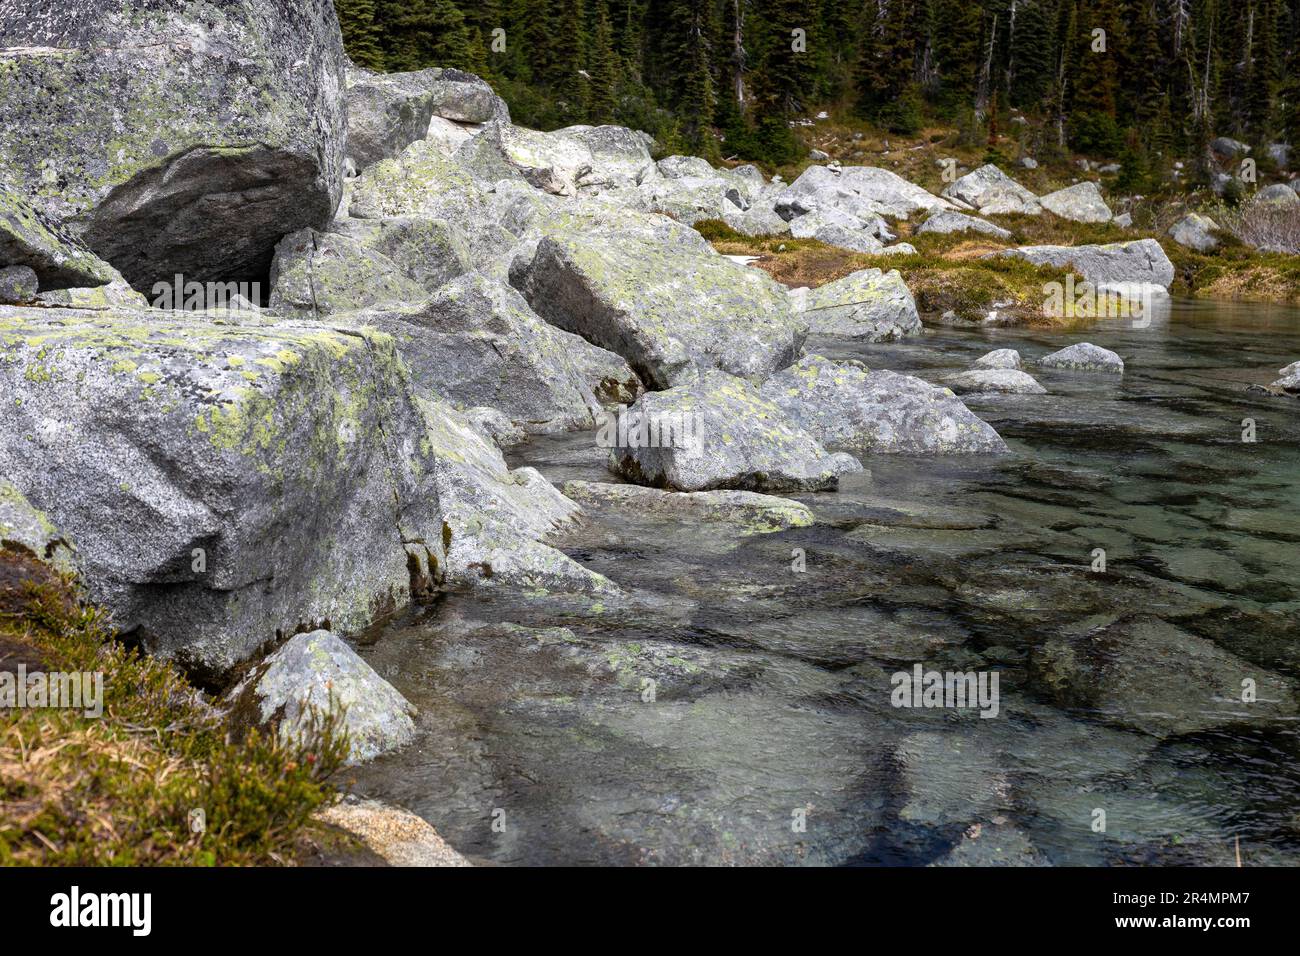 Water flows out from underneath boulders into a lake in the mountains. Stock Photo